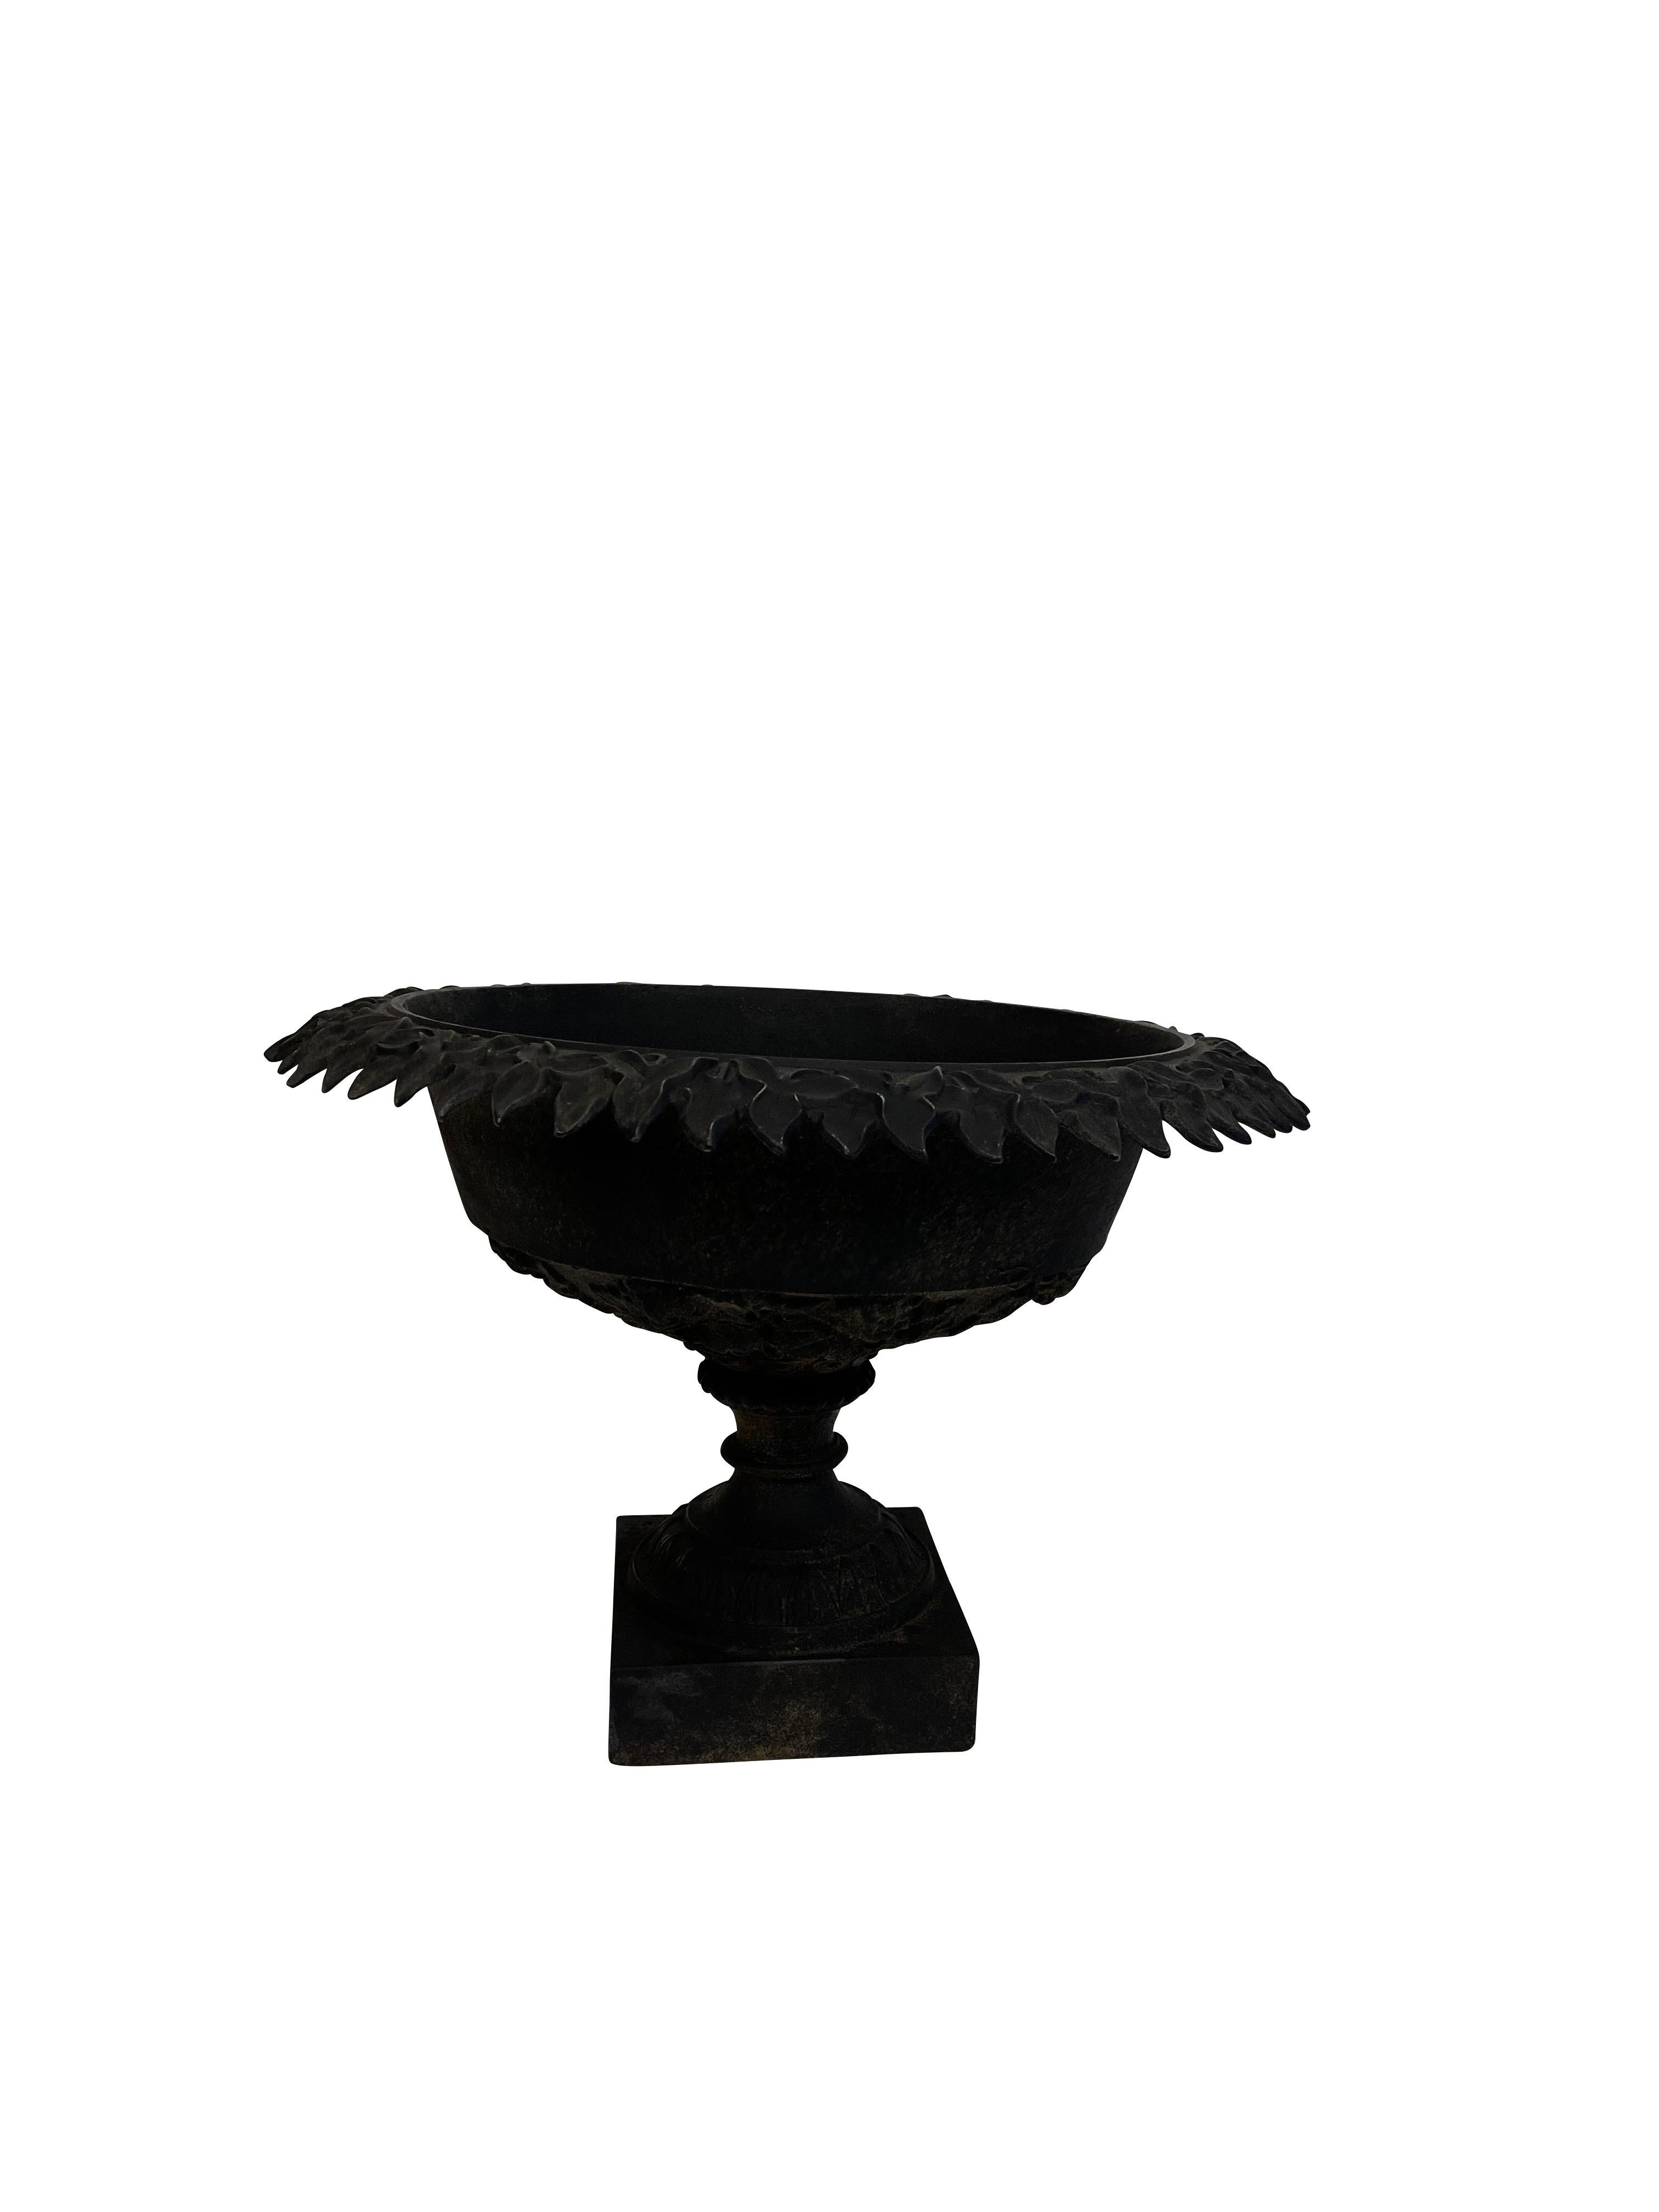 Victorian black cast iron round urn form jardinière/ planter. Pedestal base with leaf form decoration and flower petal decoration around the rim, a hole in the bottom for drainage. The basin sits on a square base. Black matte finish beautiful indoor